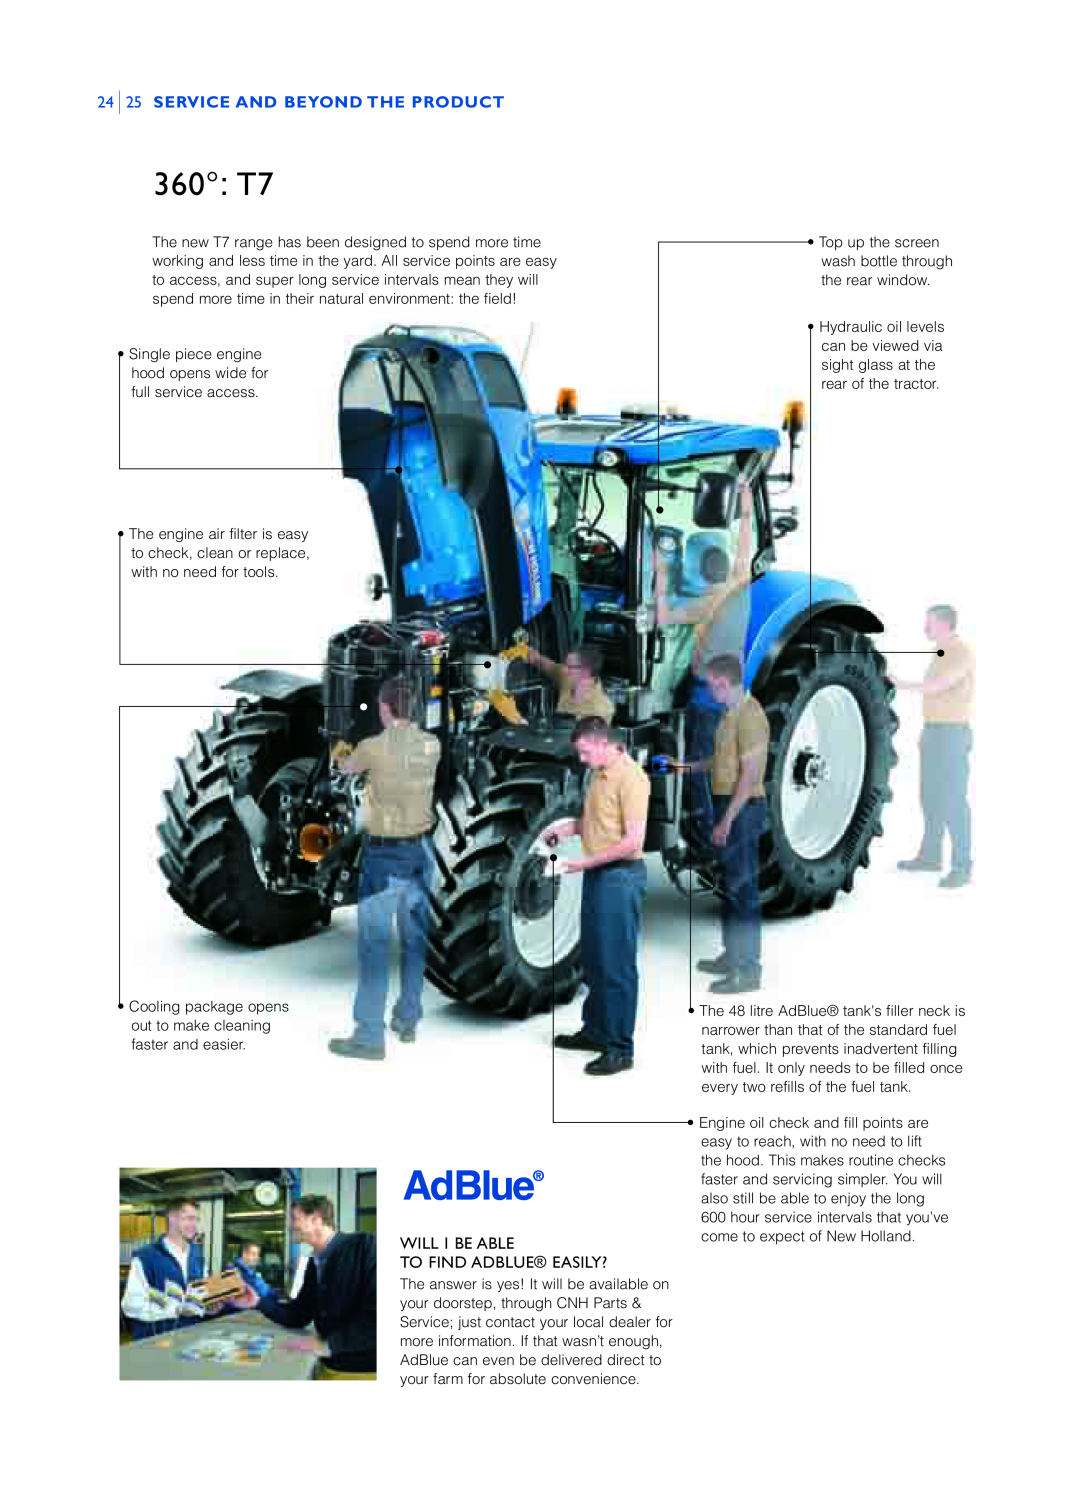 New Holland T7.170, T7.270, T7.260 360 T7, 24 25 SERVICE AND BEYOND THE PRODUCT, Will I Be Able To Find Adblue Easily? 